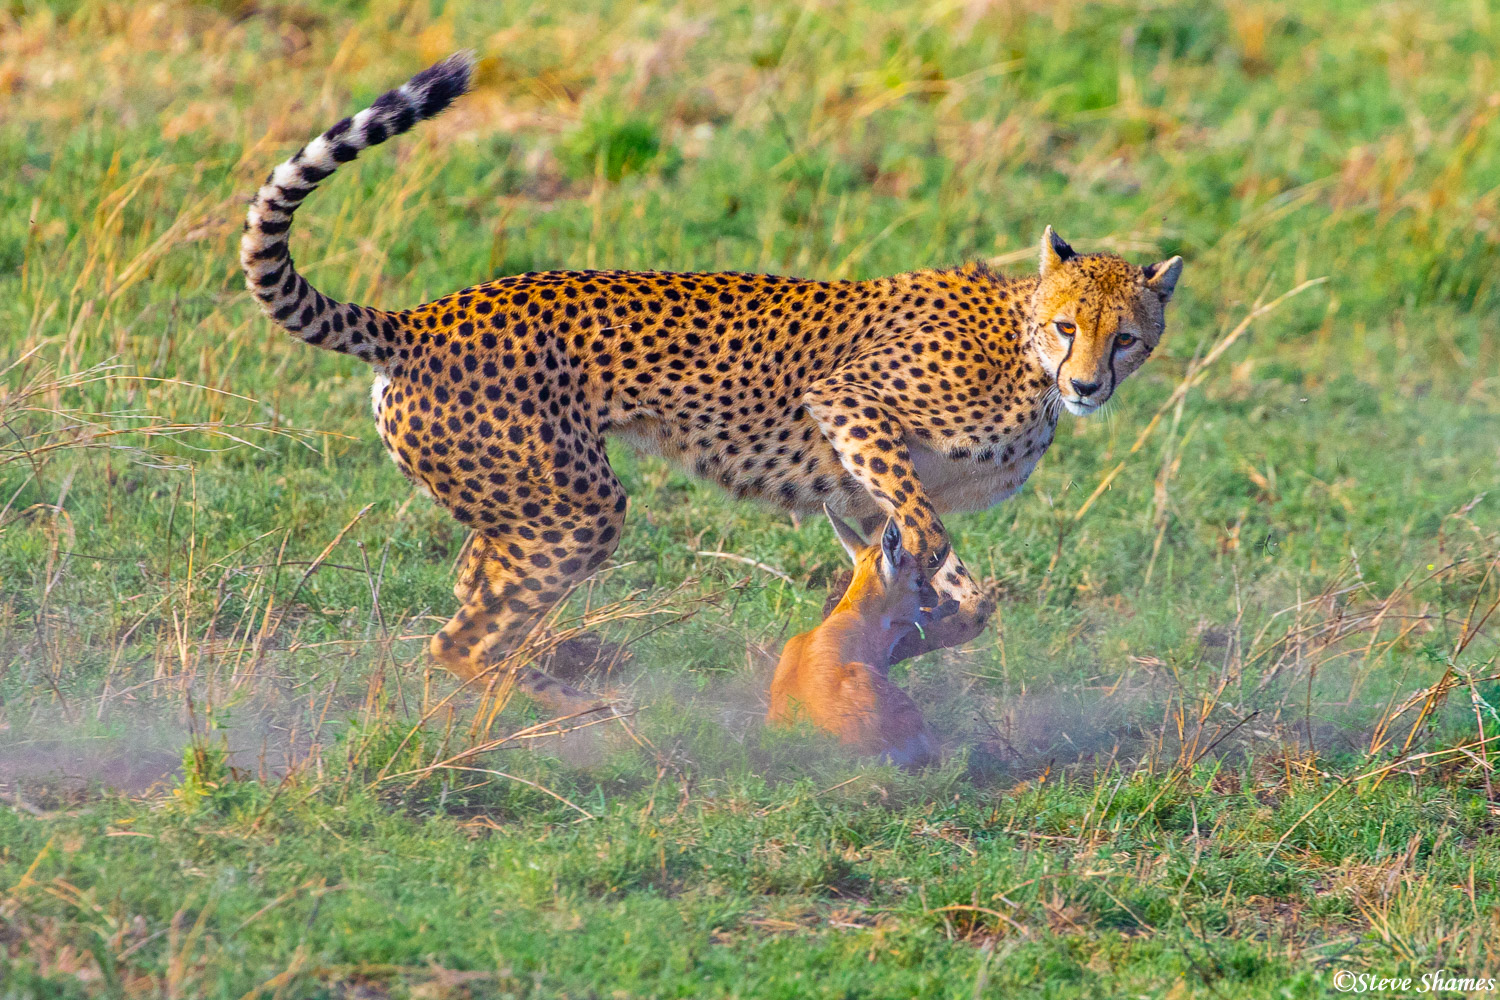 Mother cheetah playing around with her catch, like a housecat will play with a mouse before killing it.